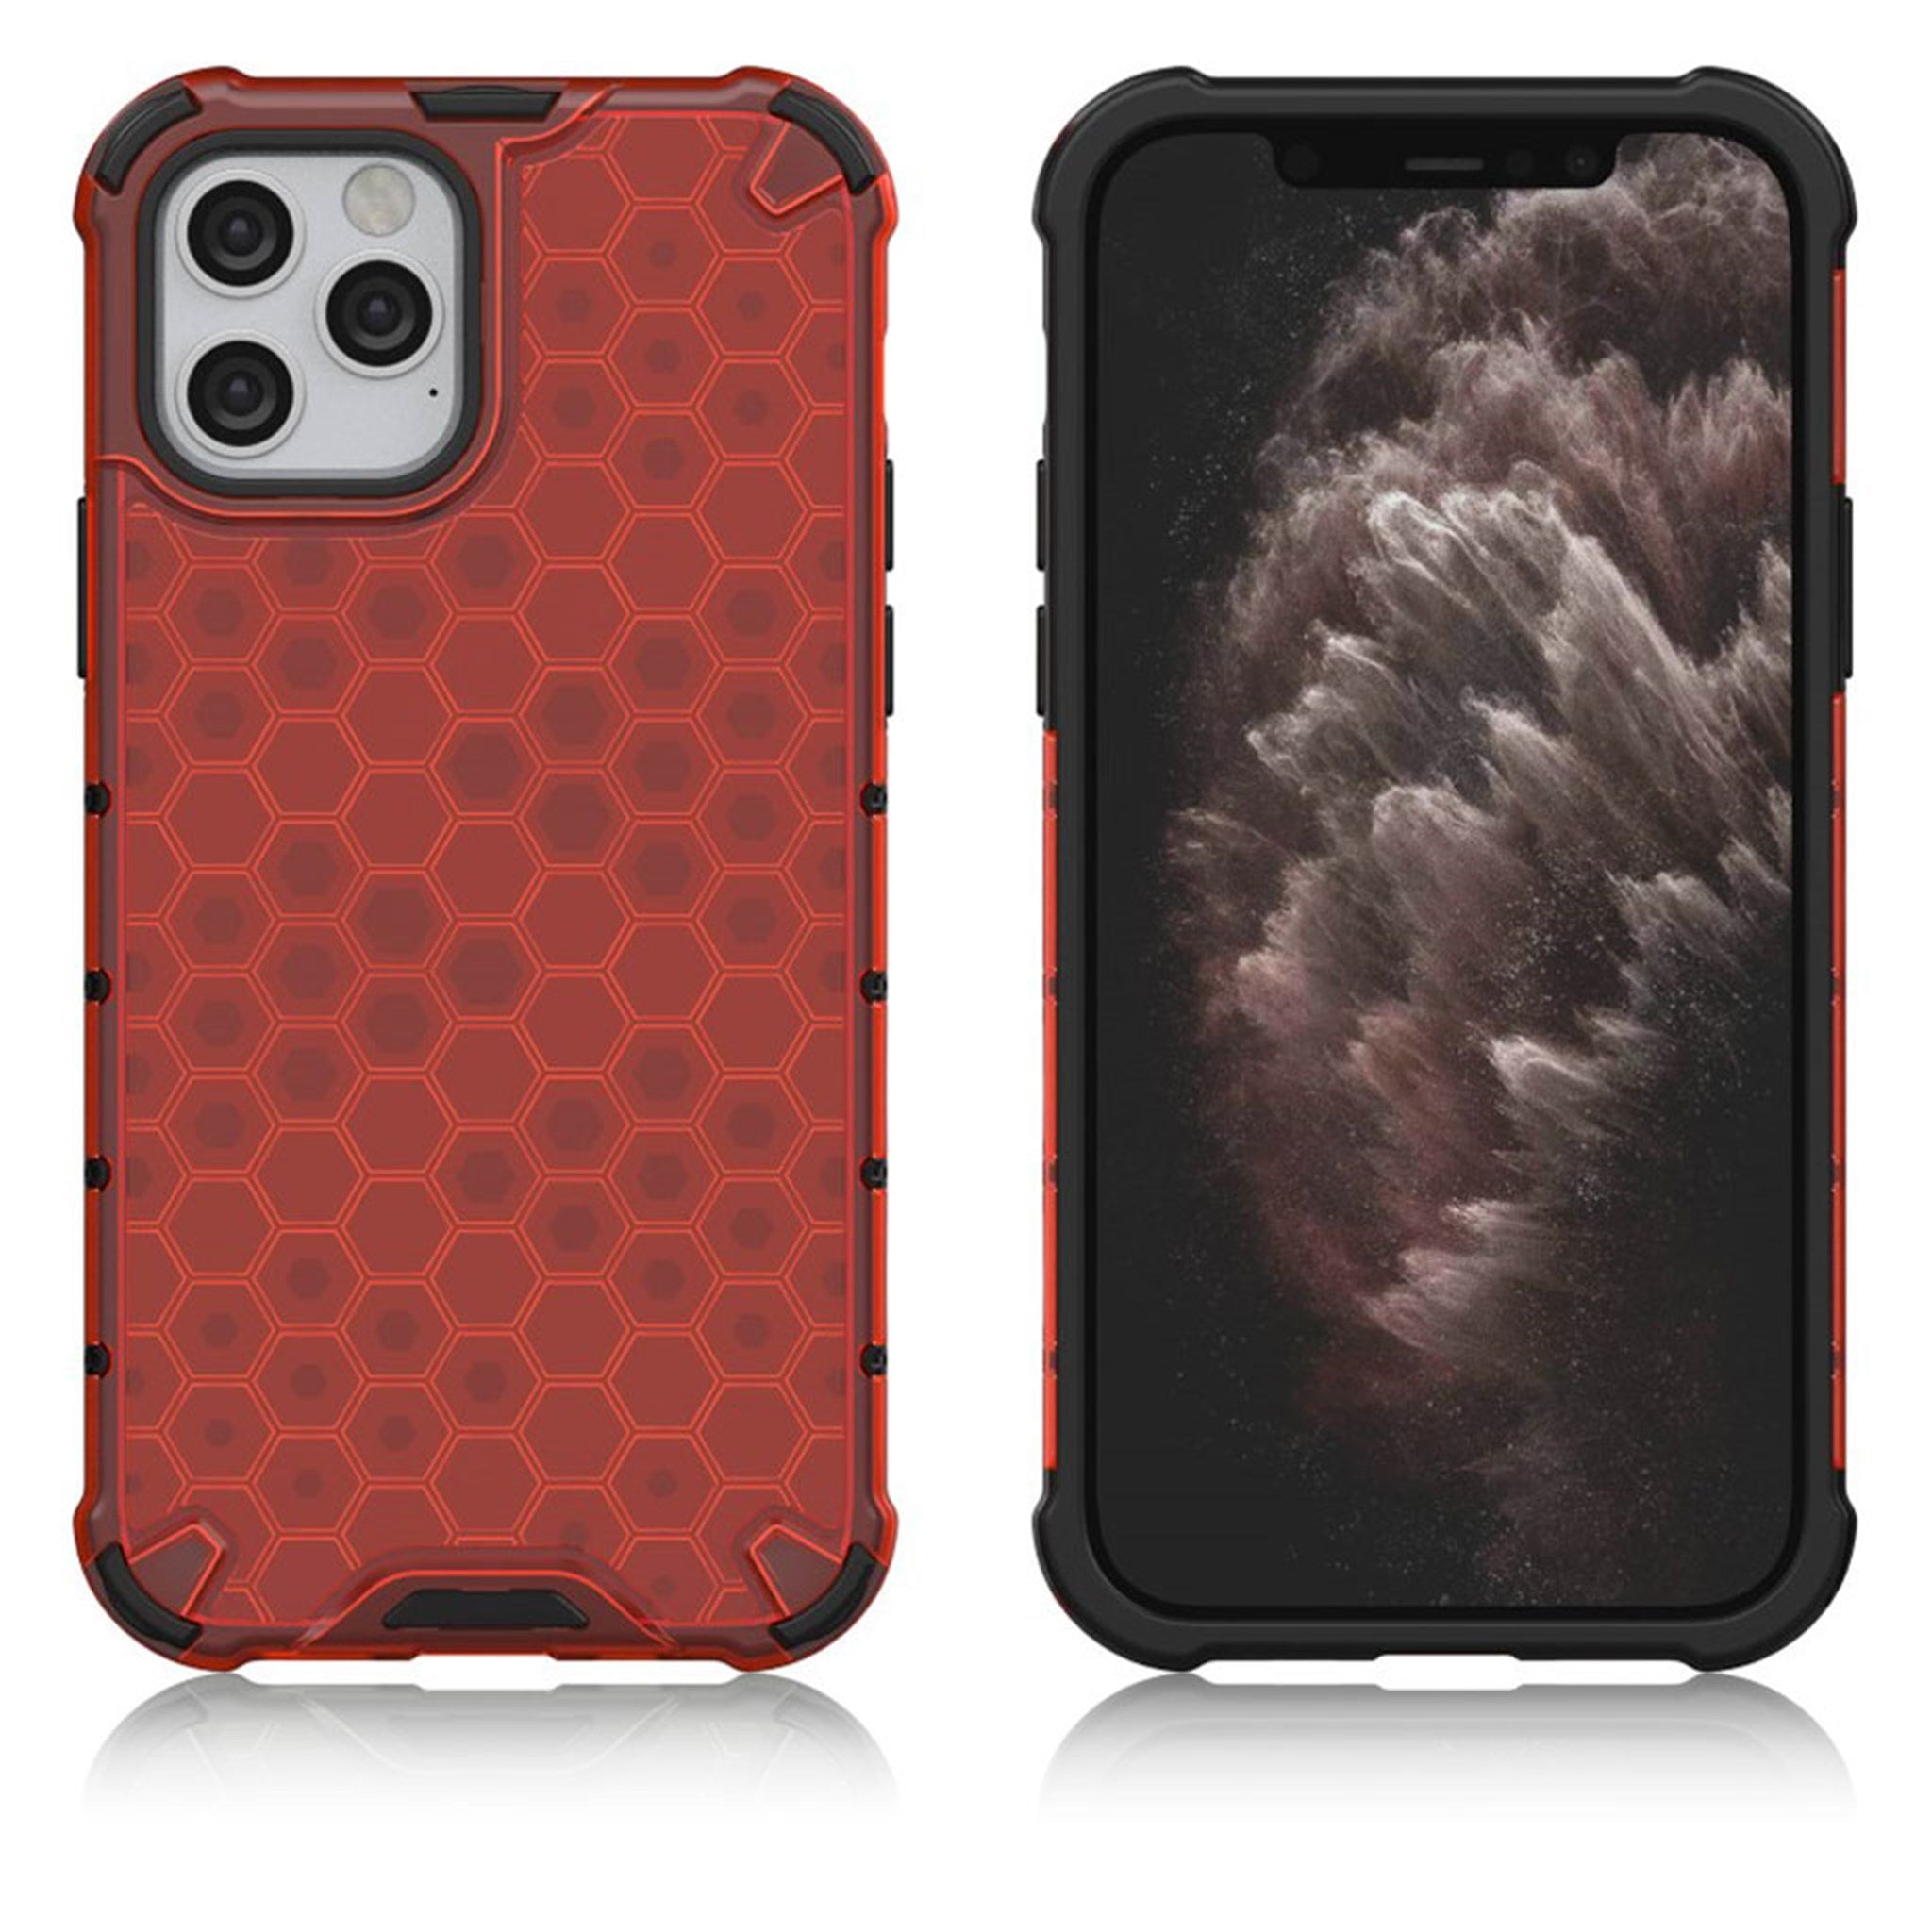 Bofink Honeycomb iPhone 12 / 12 Pro case - Red